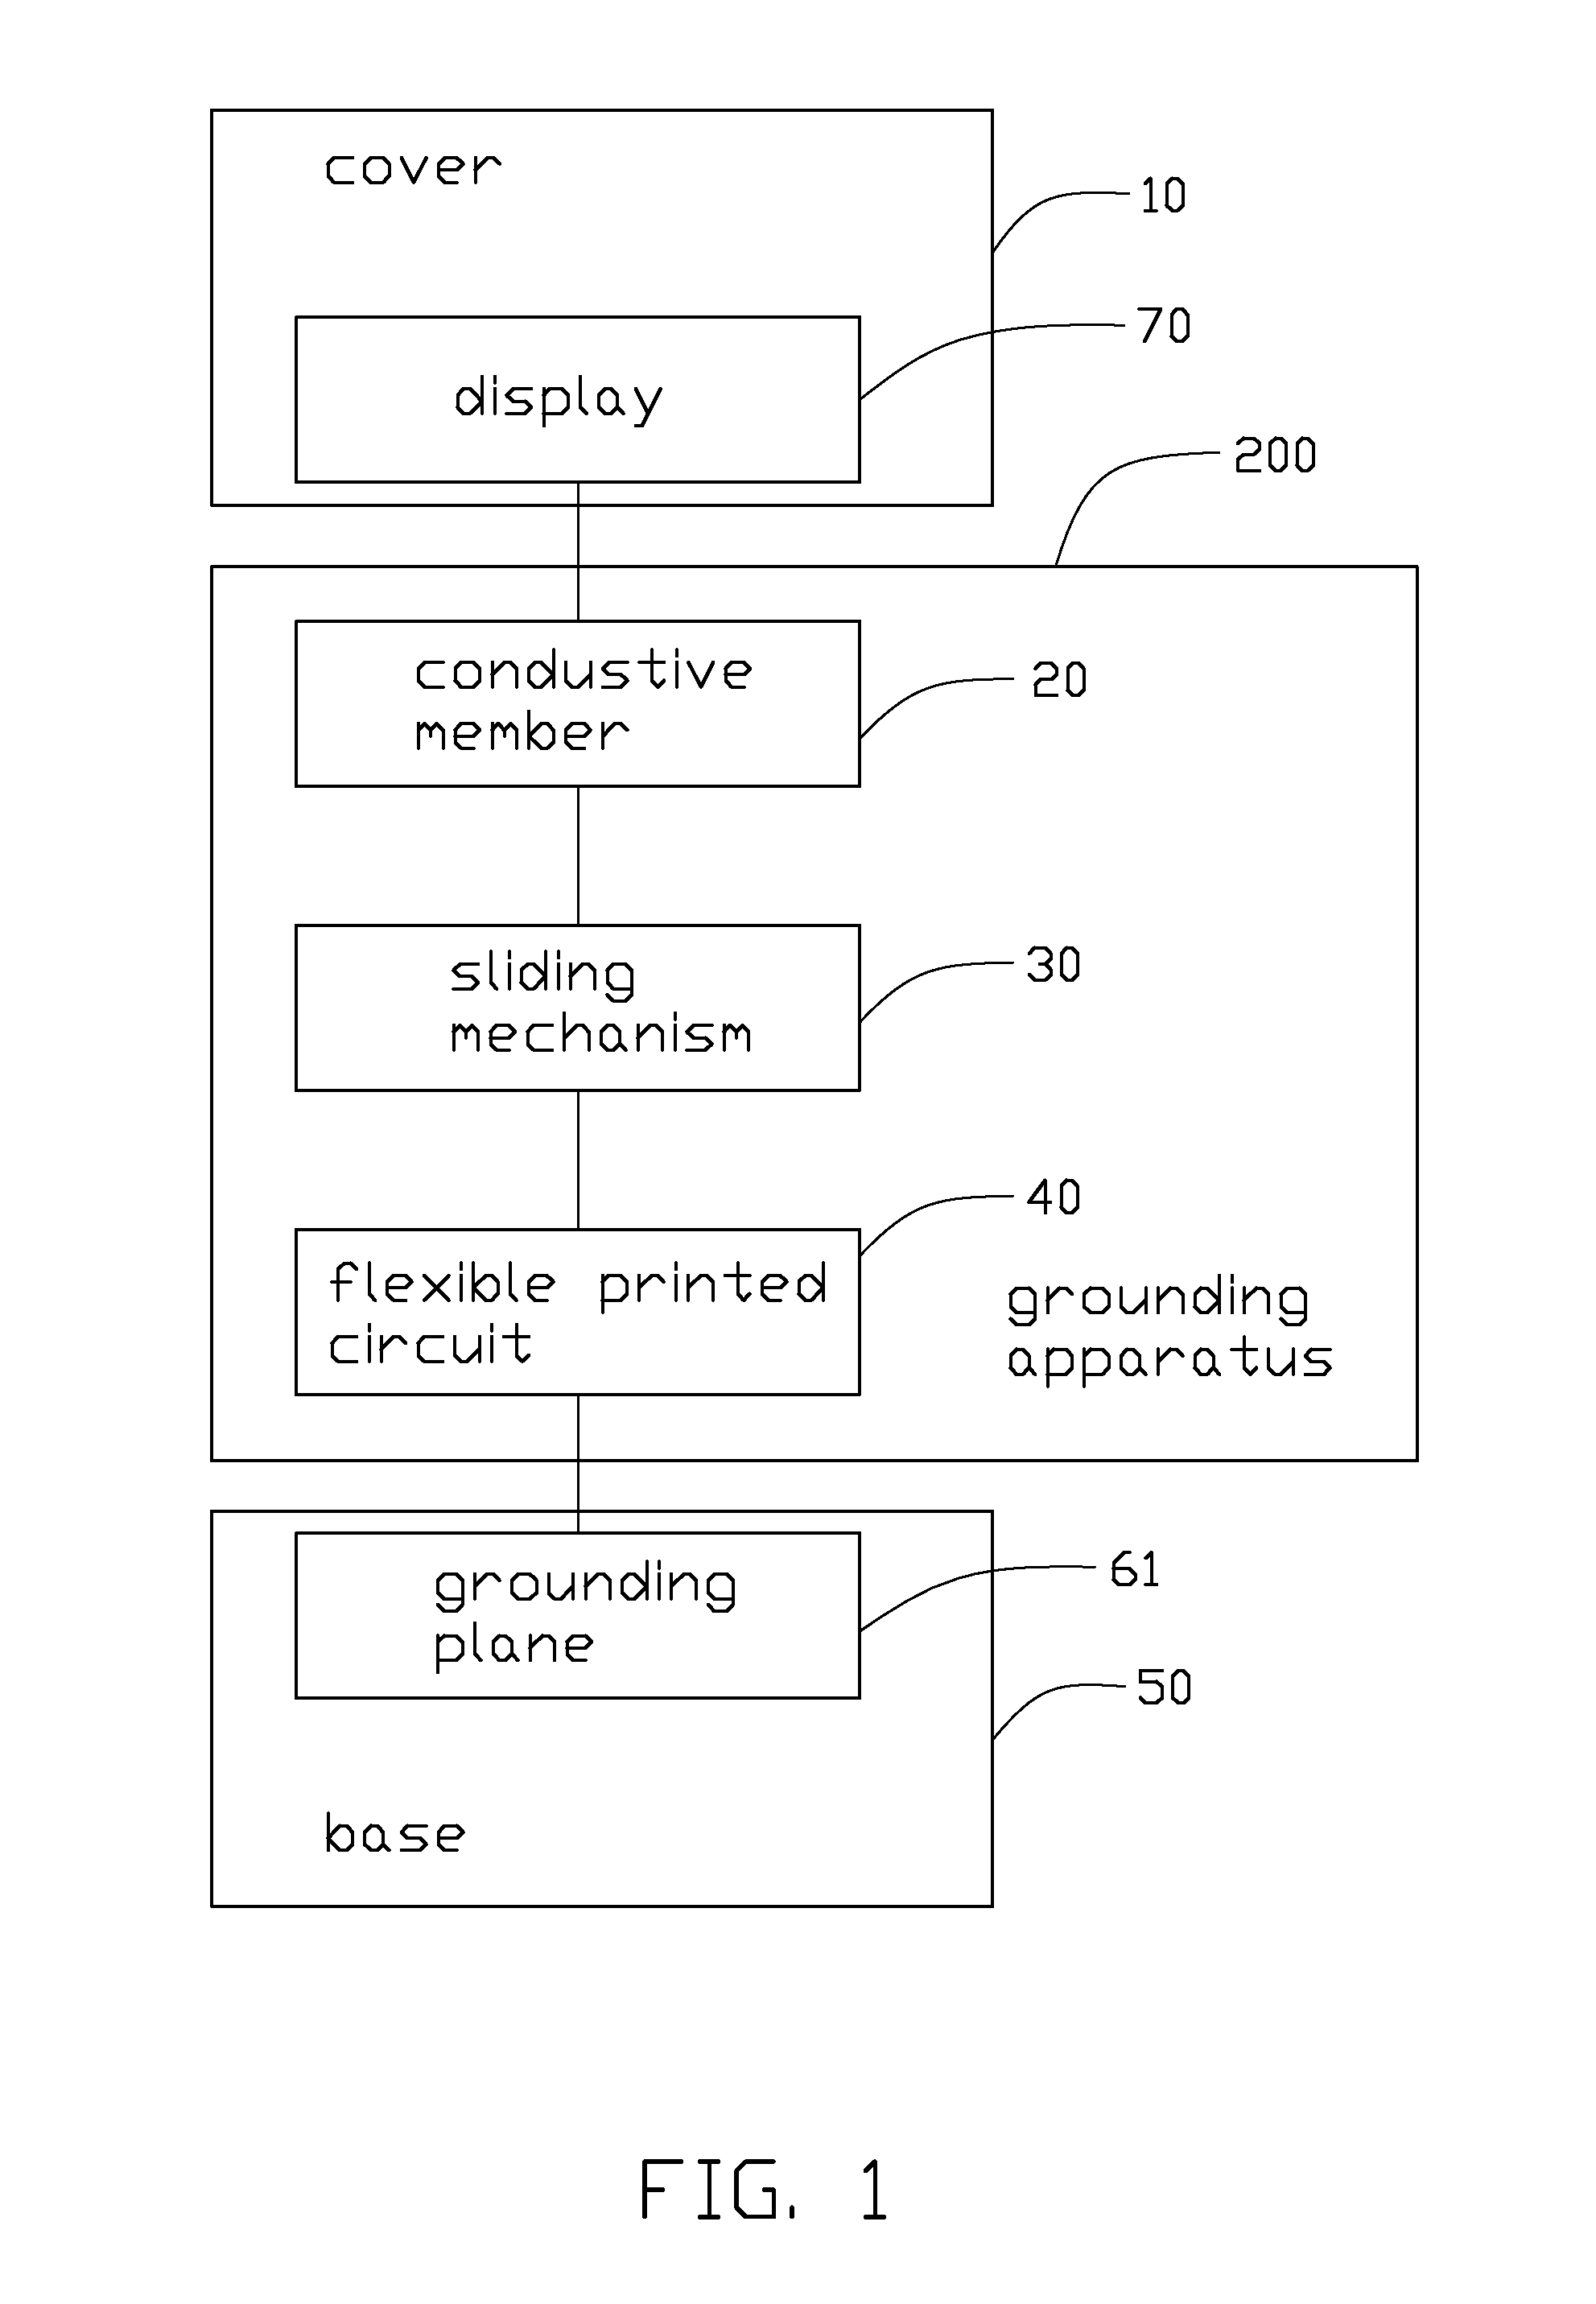 Grounding apparatus of portable electronic devices